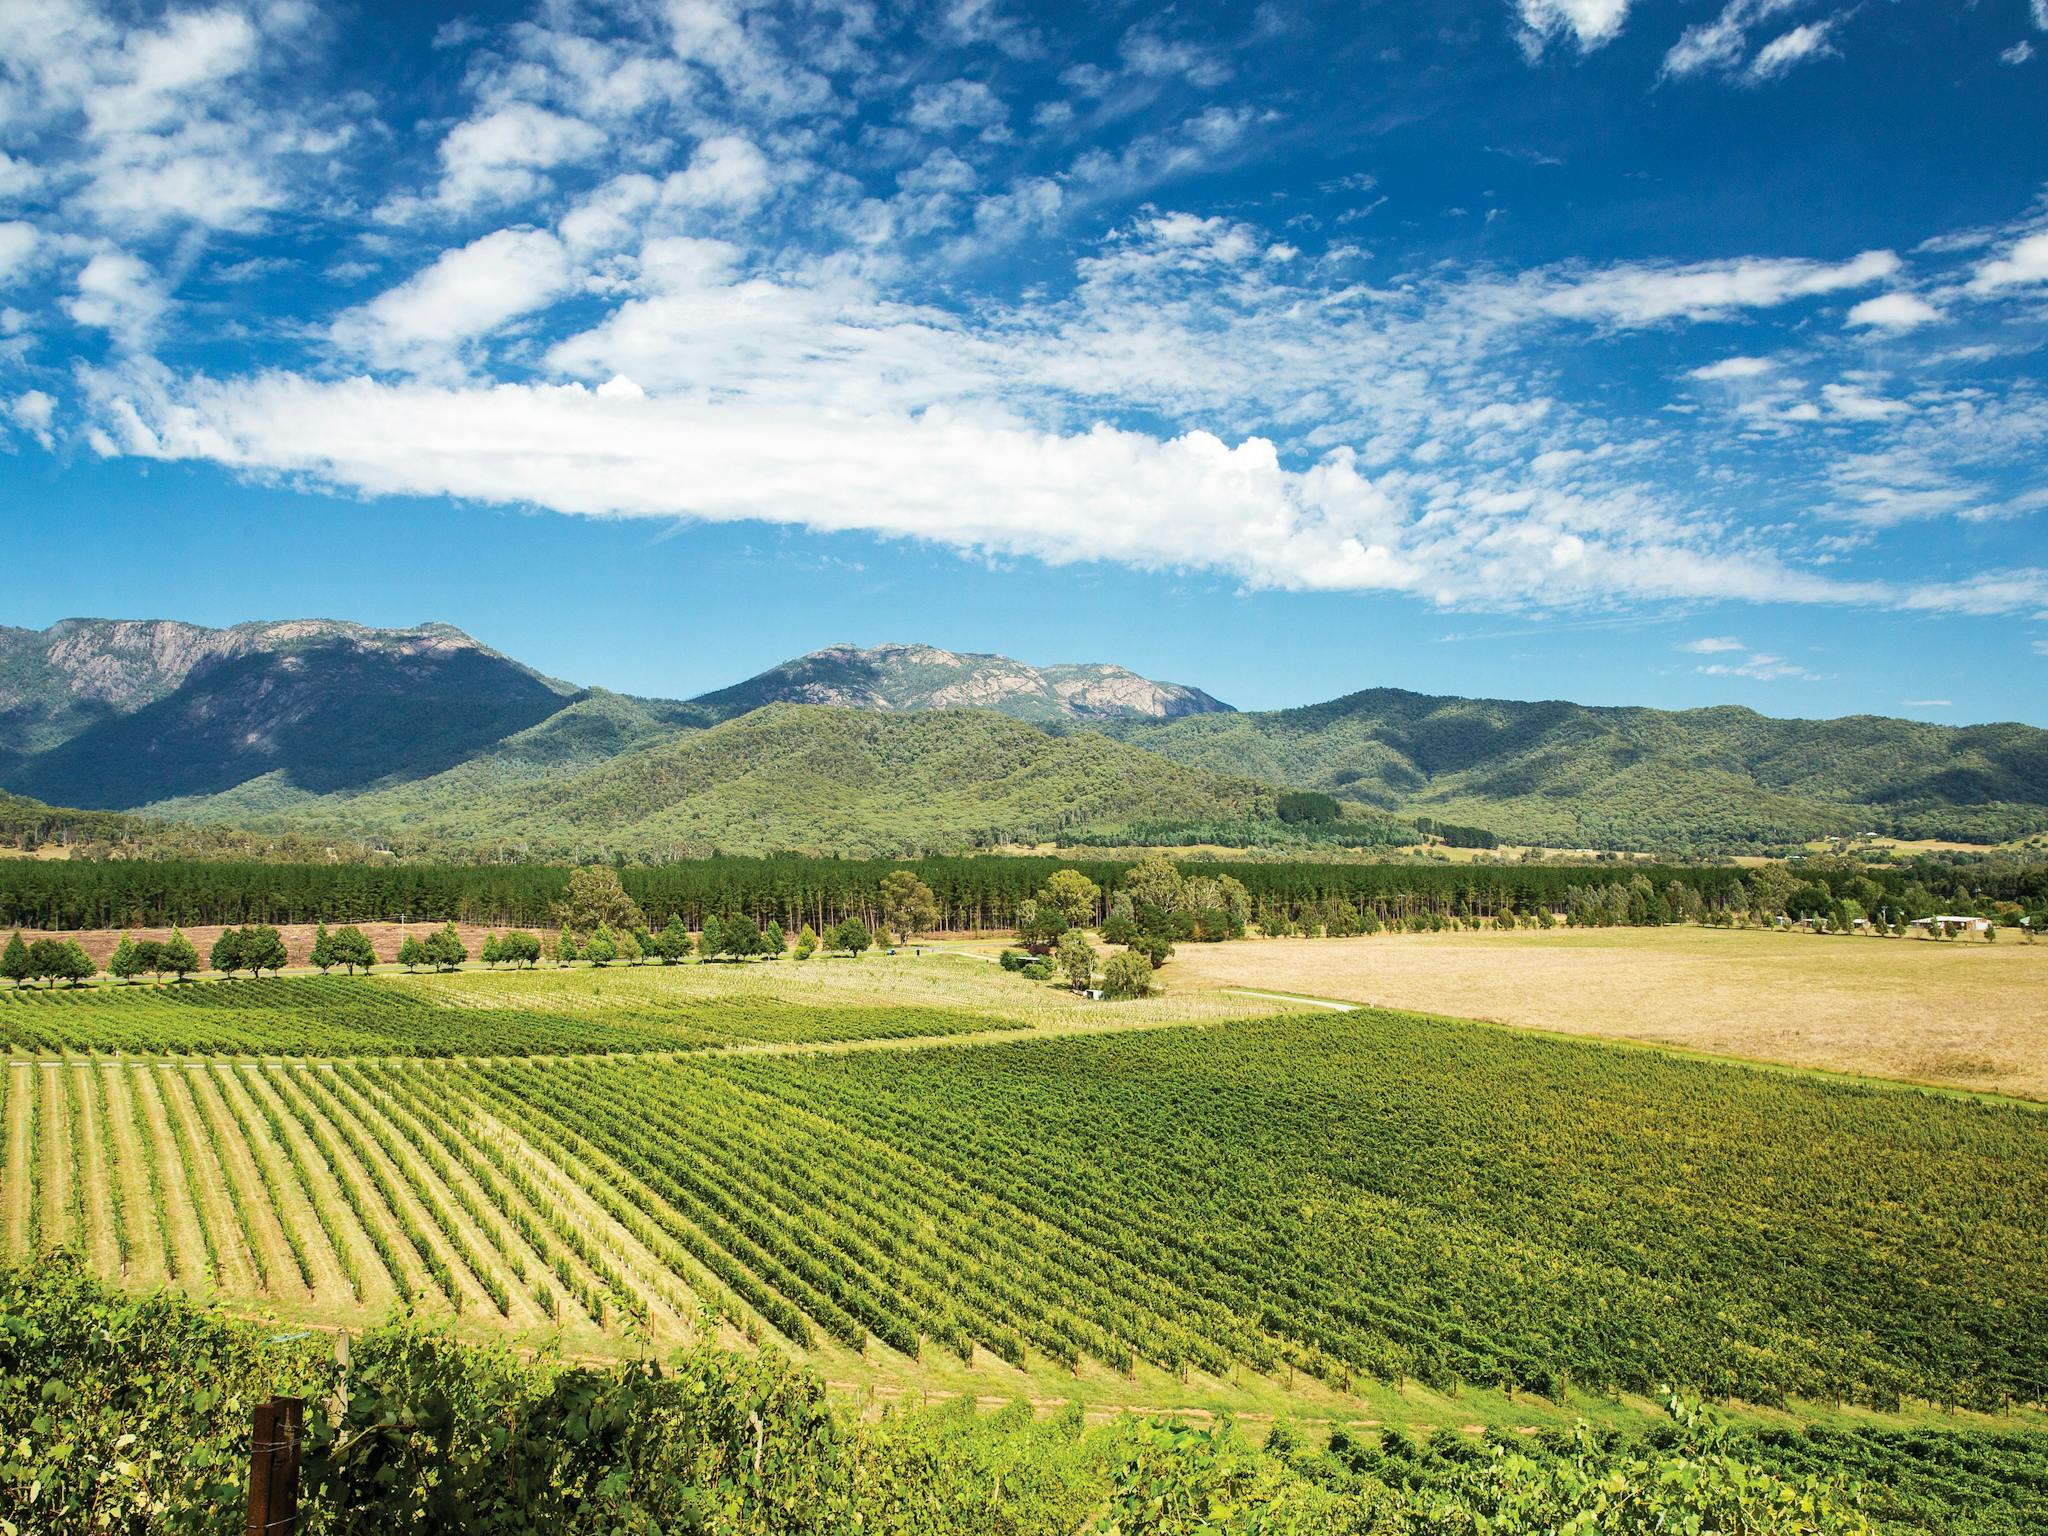 High Country Vinyards, cellar doors, wine clubs, boutique wineries, scenic tours, wine tours